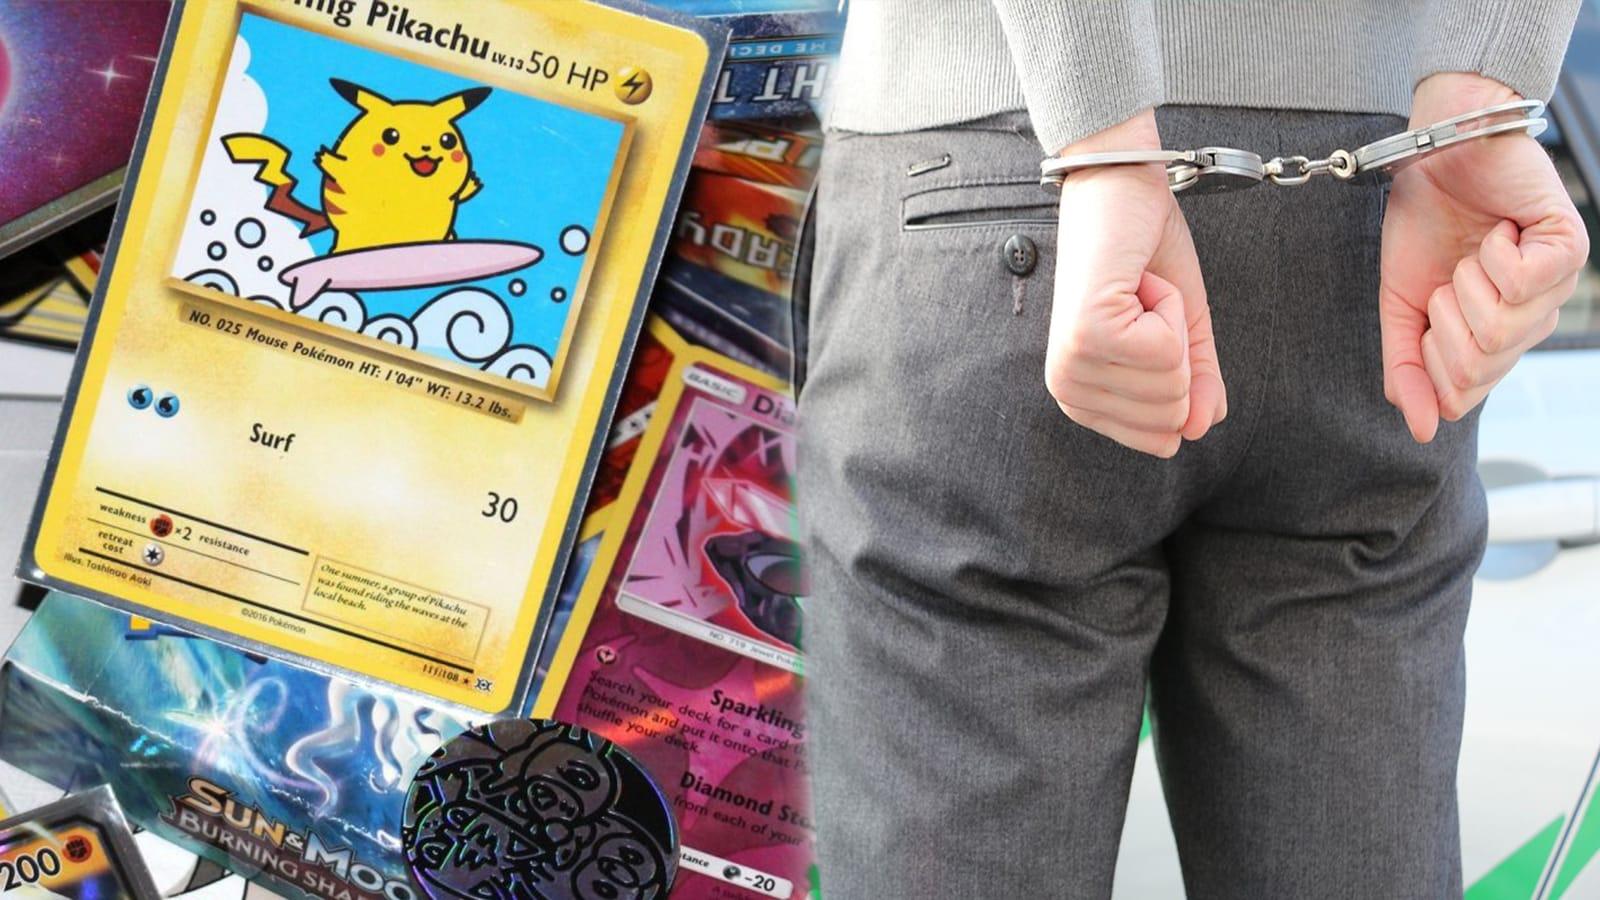 Pokemon cards next to man being arrested in handcuffs